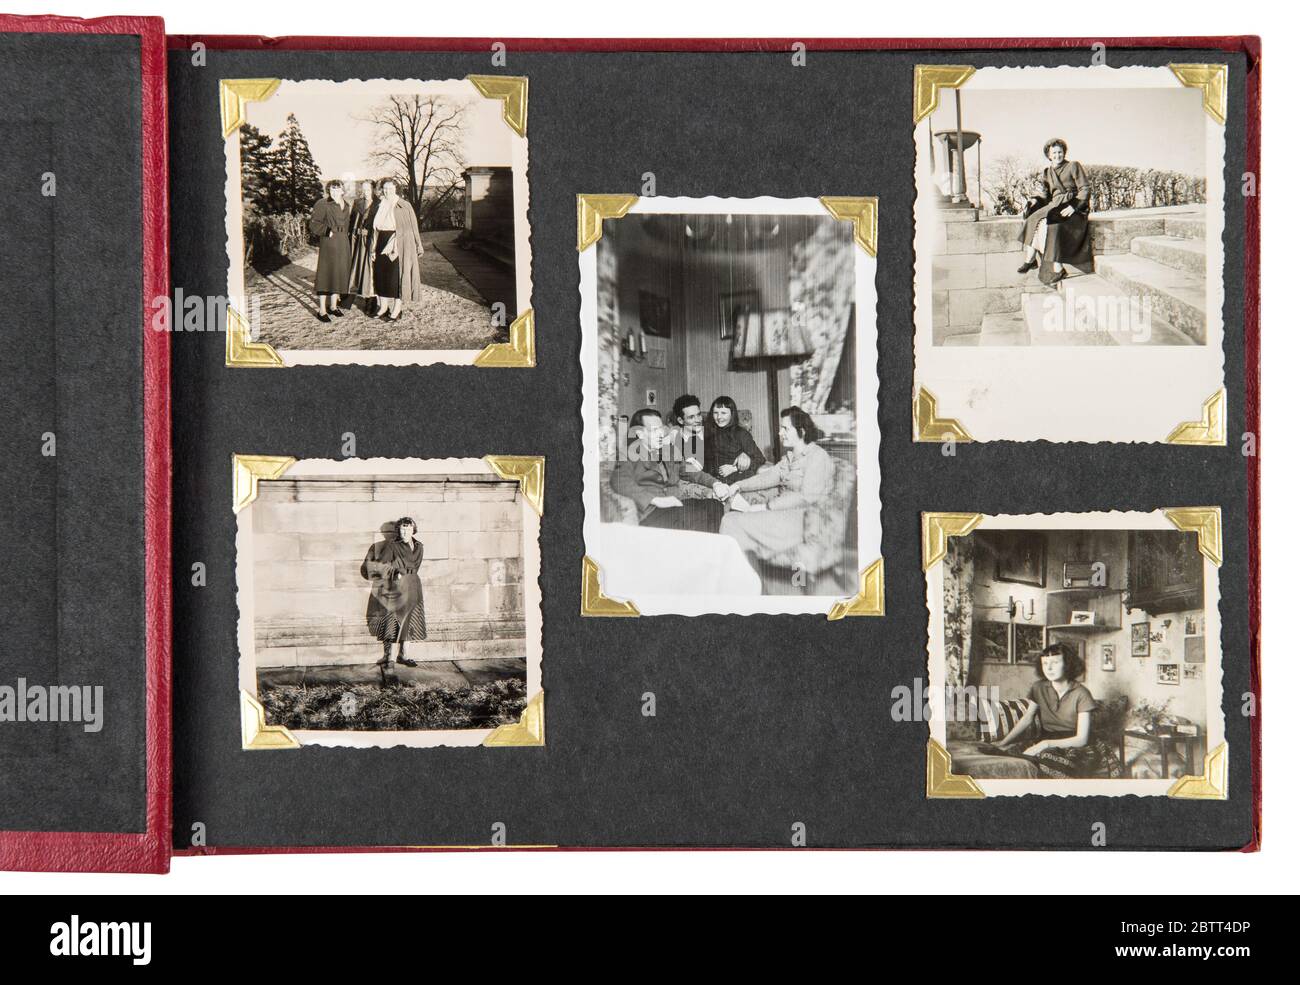 Vintage photo album with old family pictures Stock Photo - Alamy